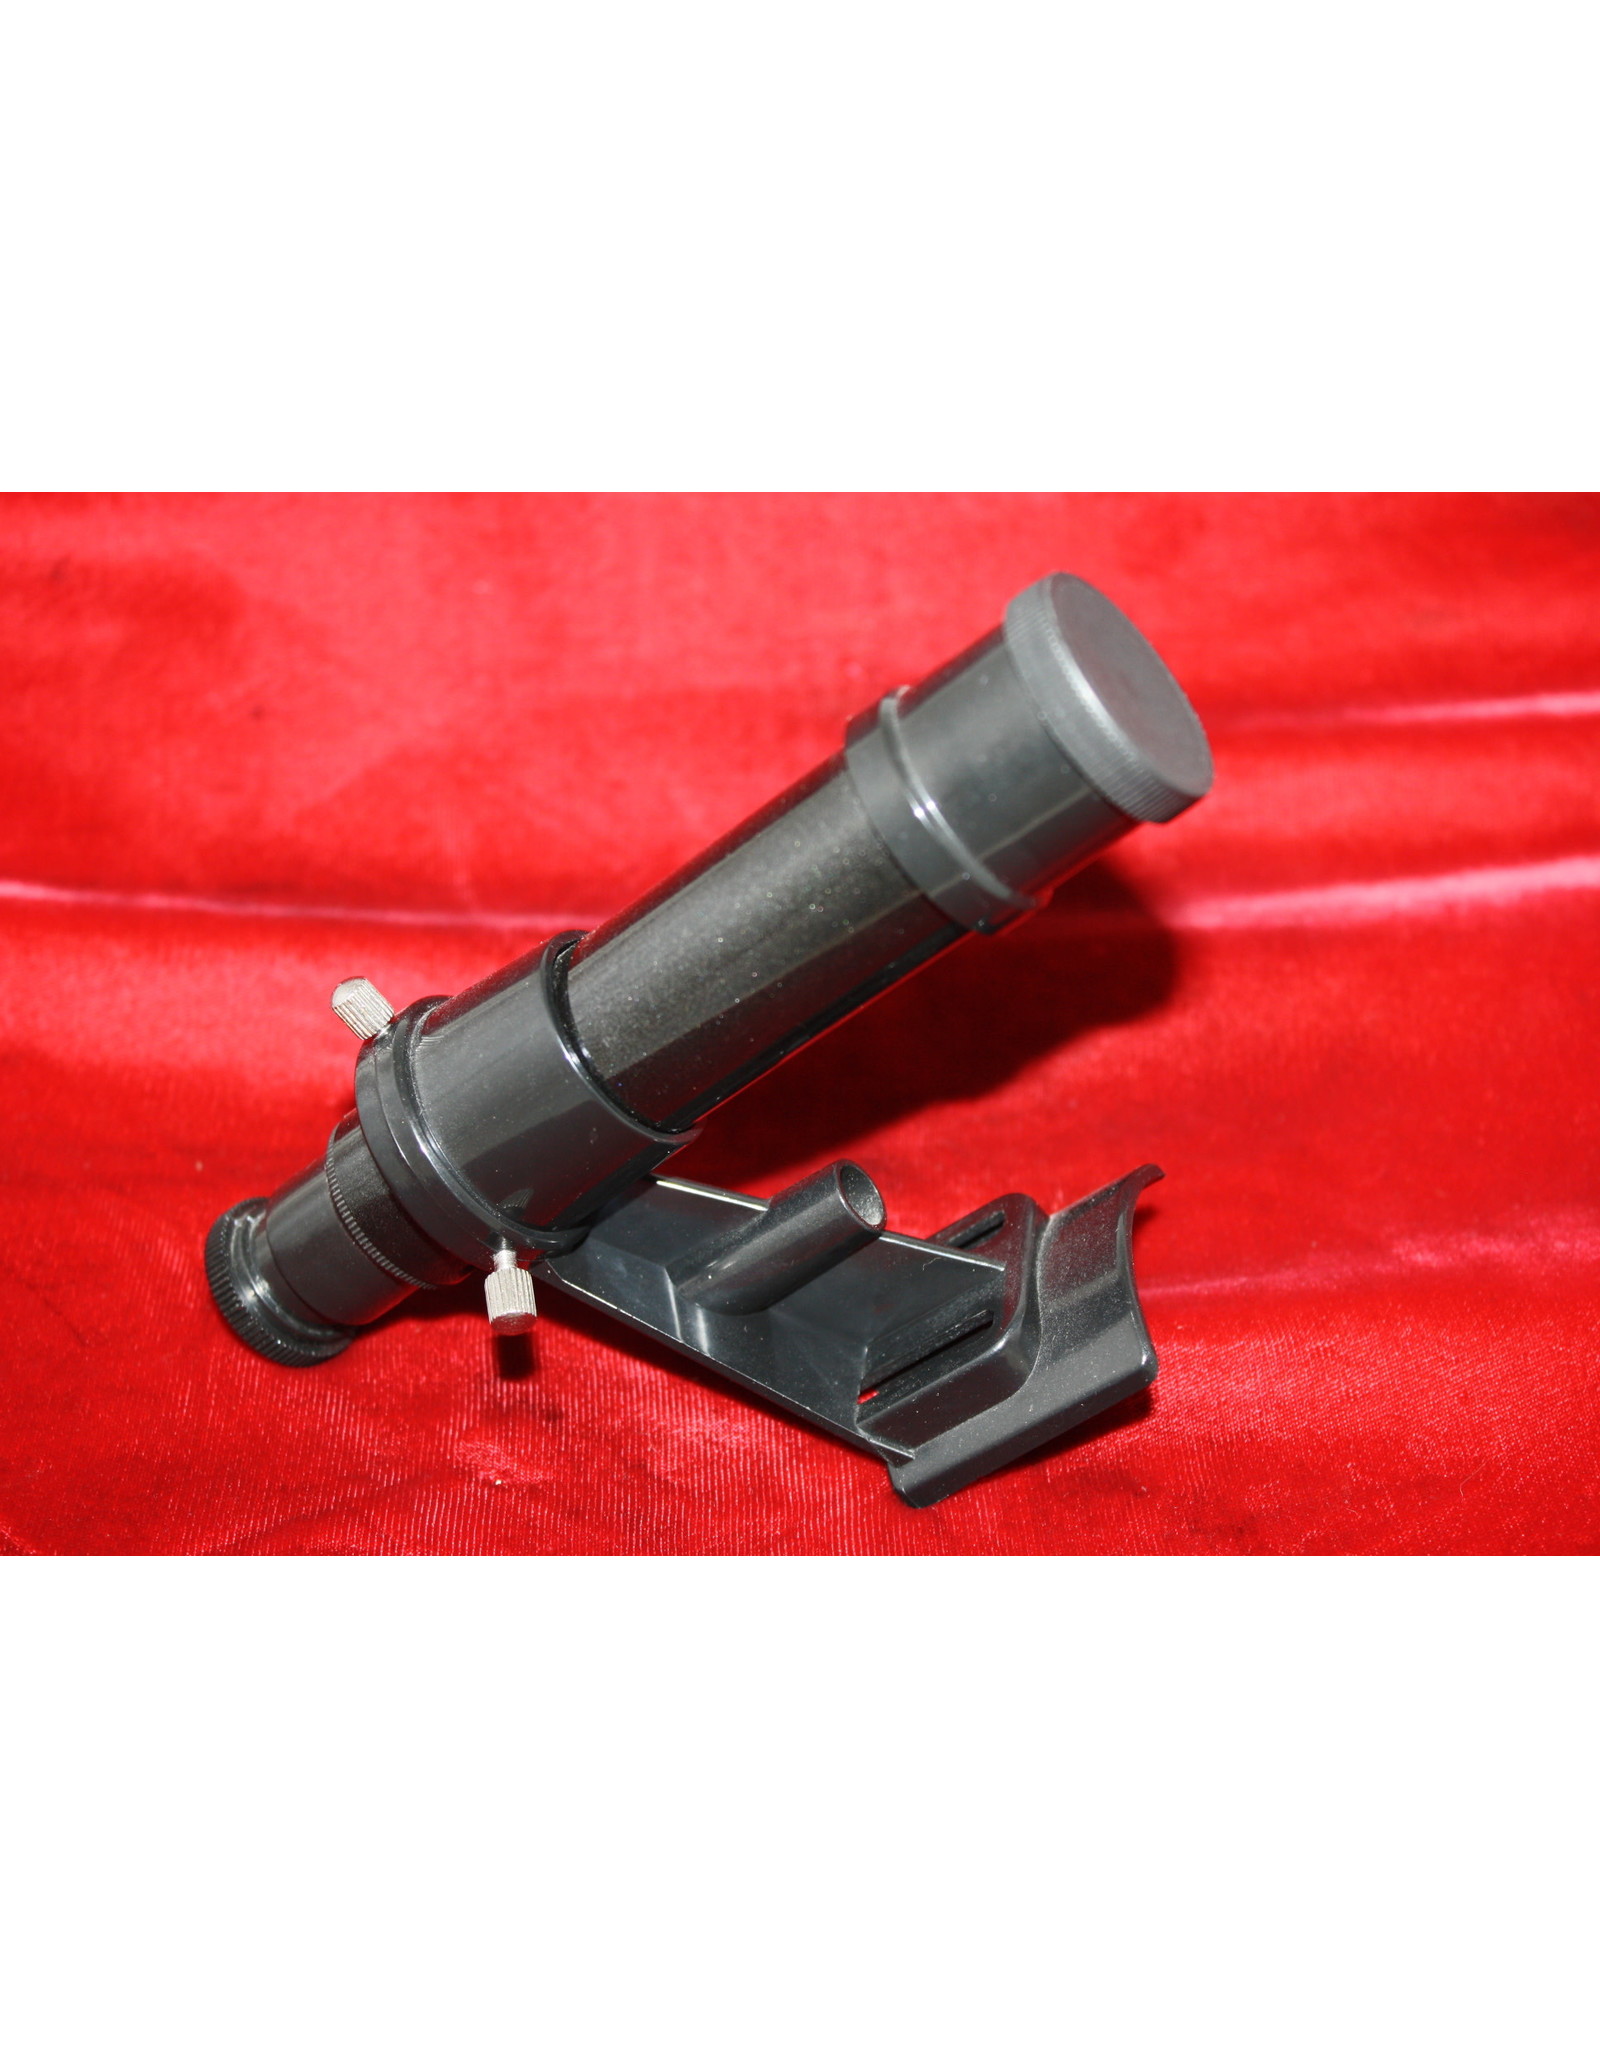 Celestron 6x30 Finderscope with bracket (Pre-owned)